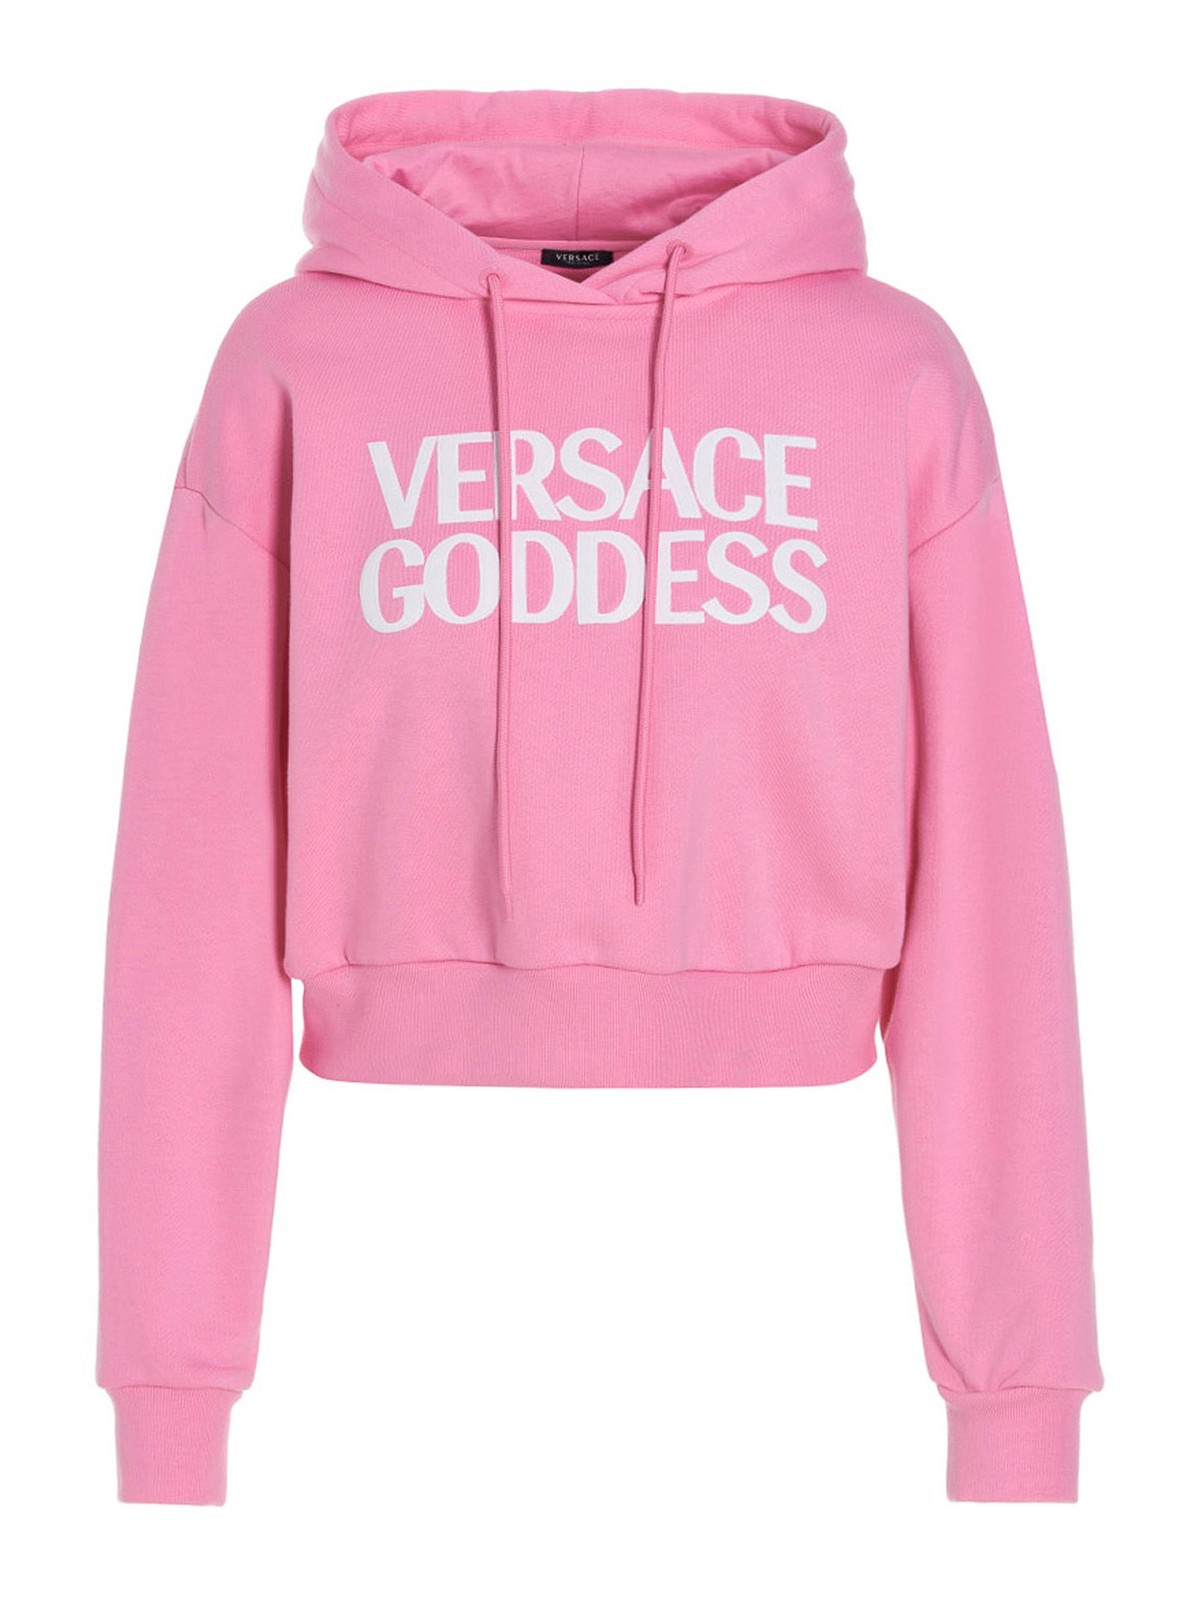 Versace Goddess Hoodie With Cropped Style In Pink